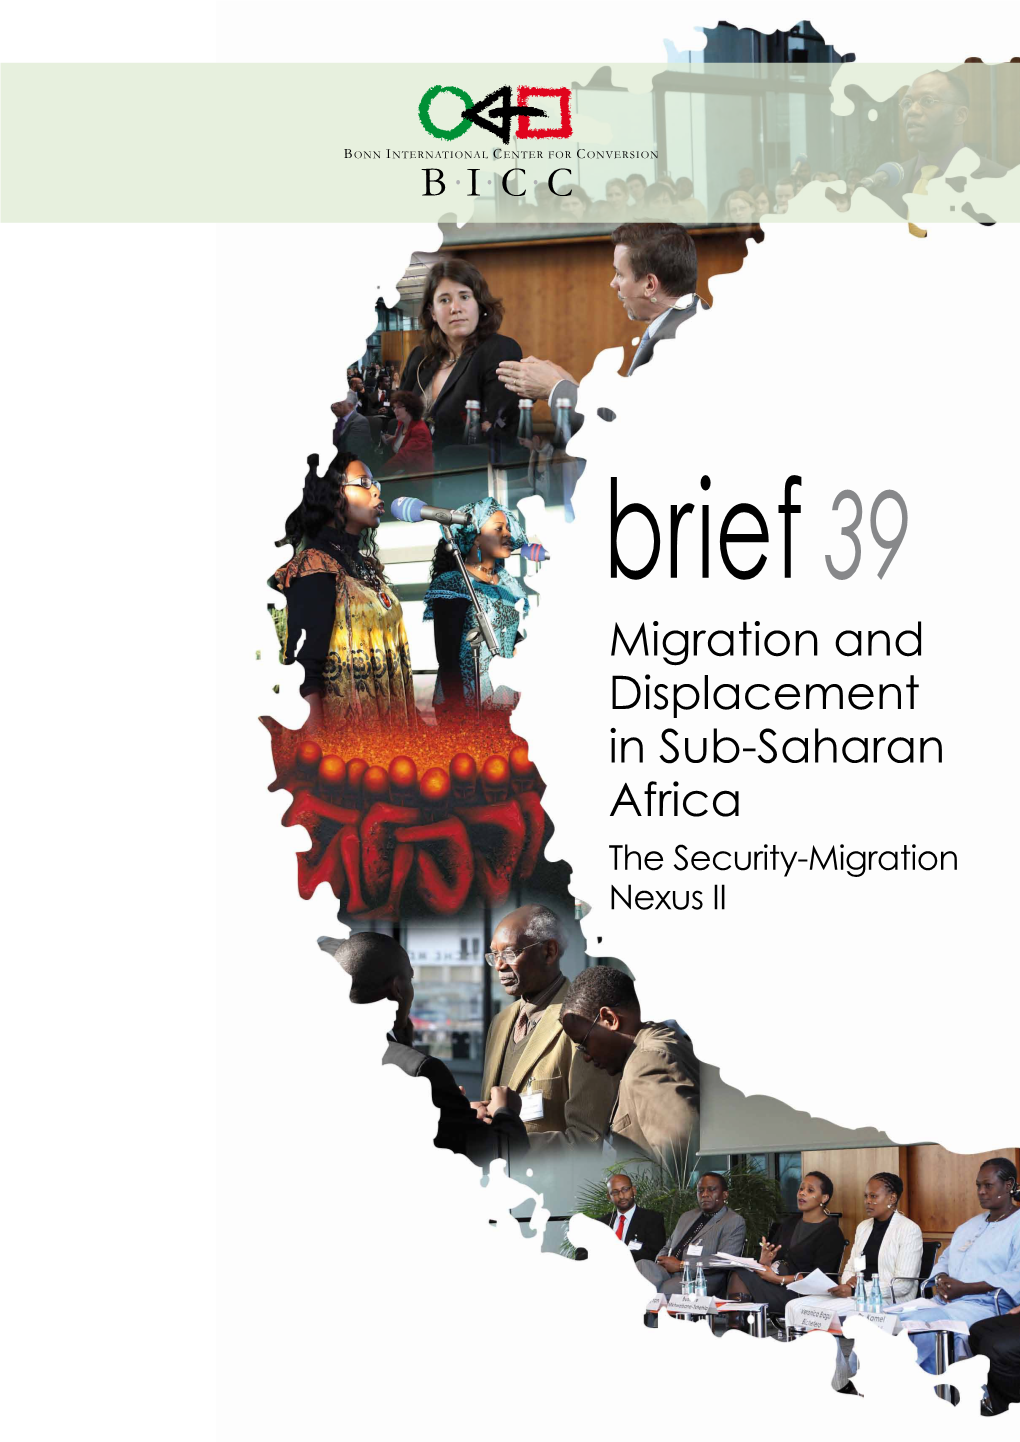 Migration and Displacement in Sub-Saharan Africa the Security-Migration Nexus II Contents